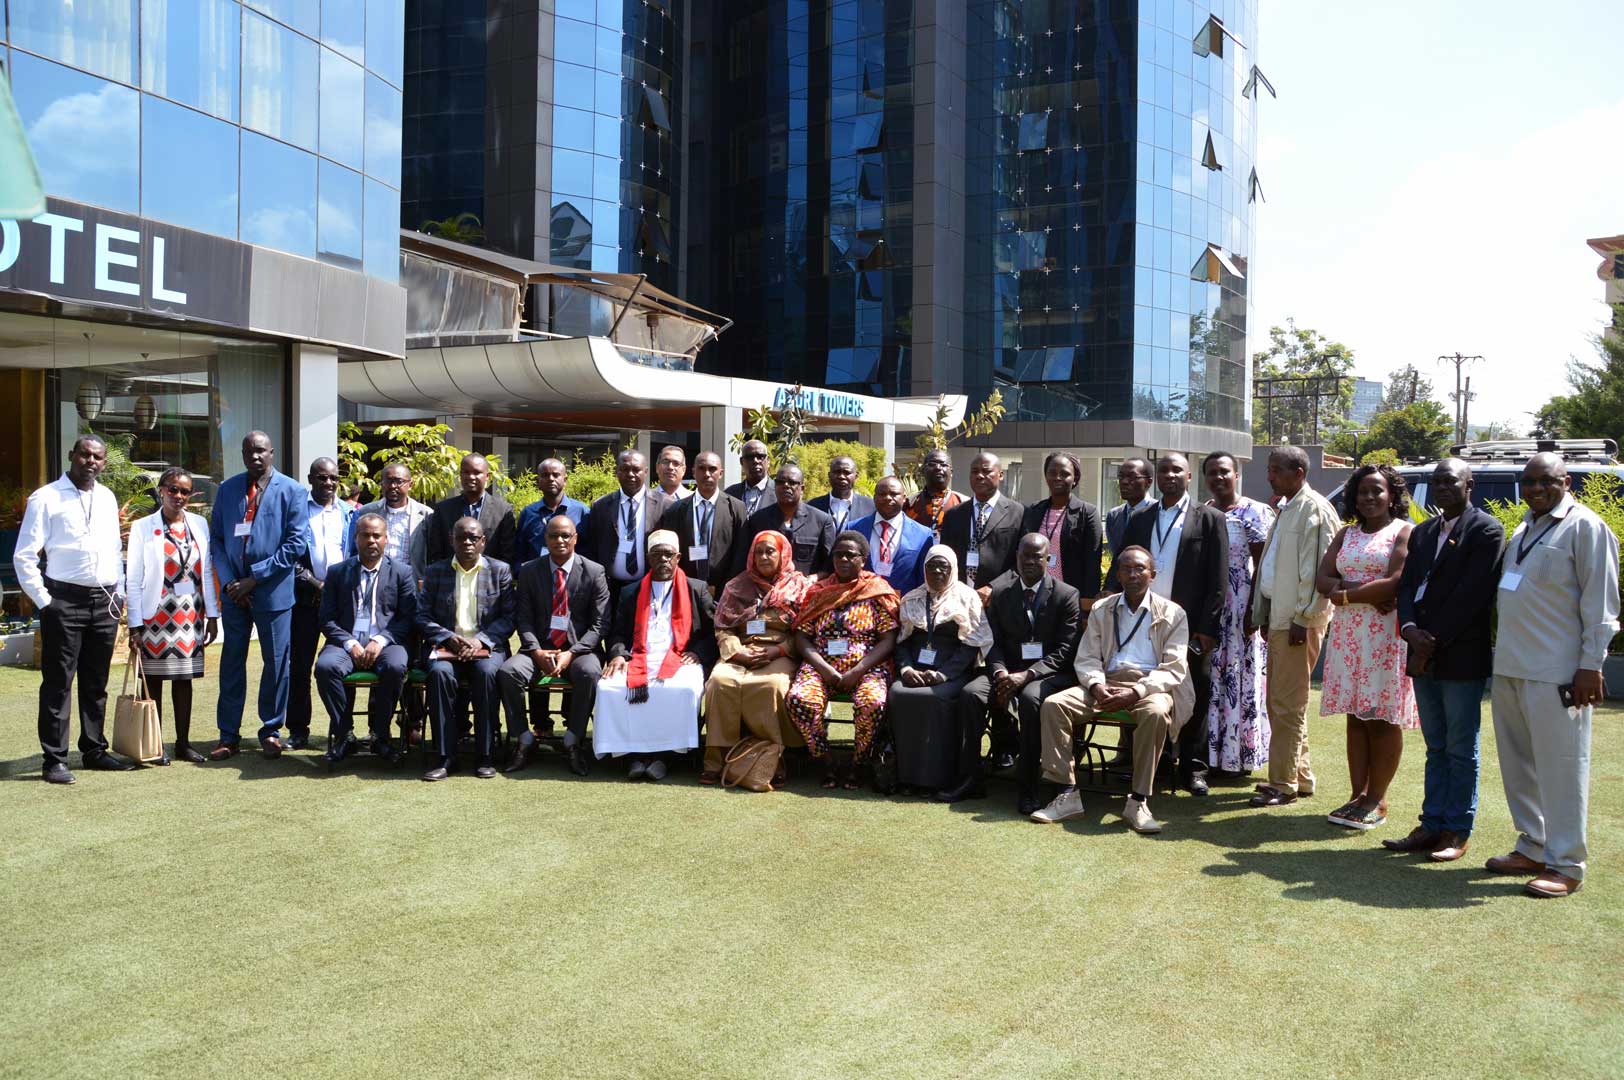 © 2019 AU-IBAR. Participants at the 5th General Assembly of the Sub-Regional Focal Point (S-RFP) for the management of AnGR for Eastern Africa at Azure Hotel, Nairobi, Kenya (17-19 December 2018).